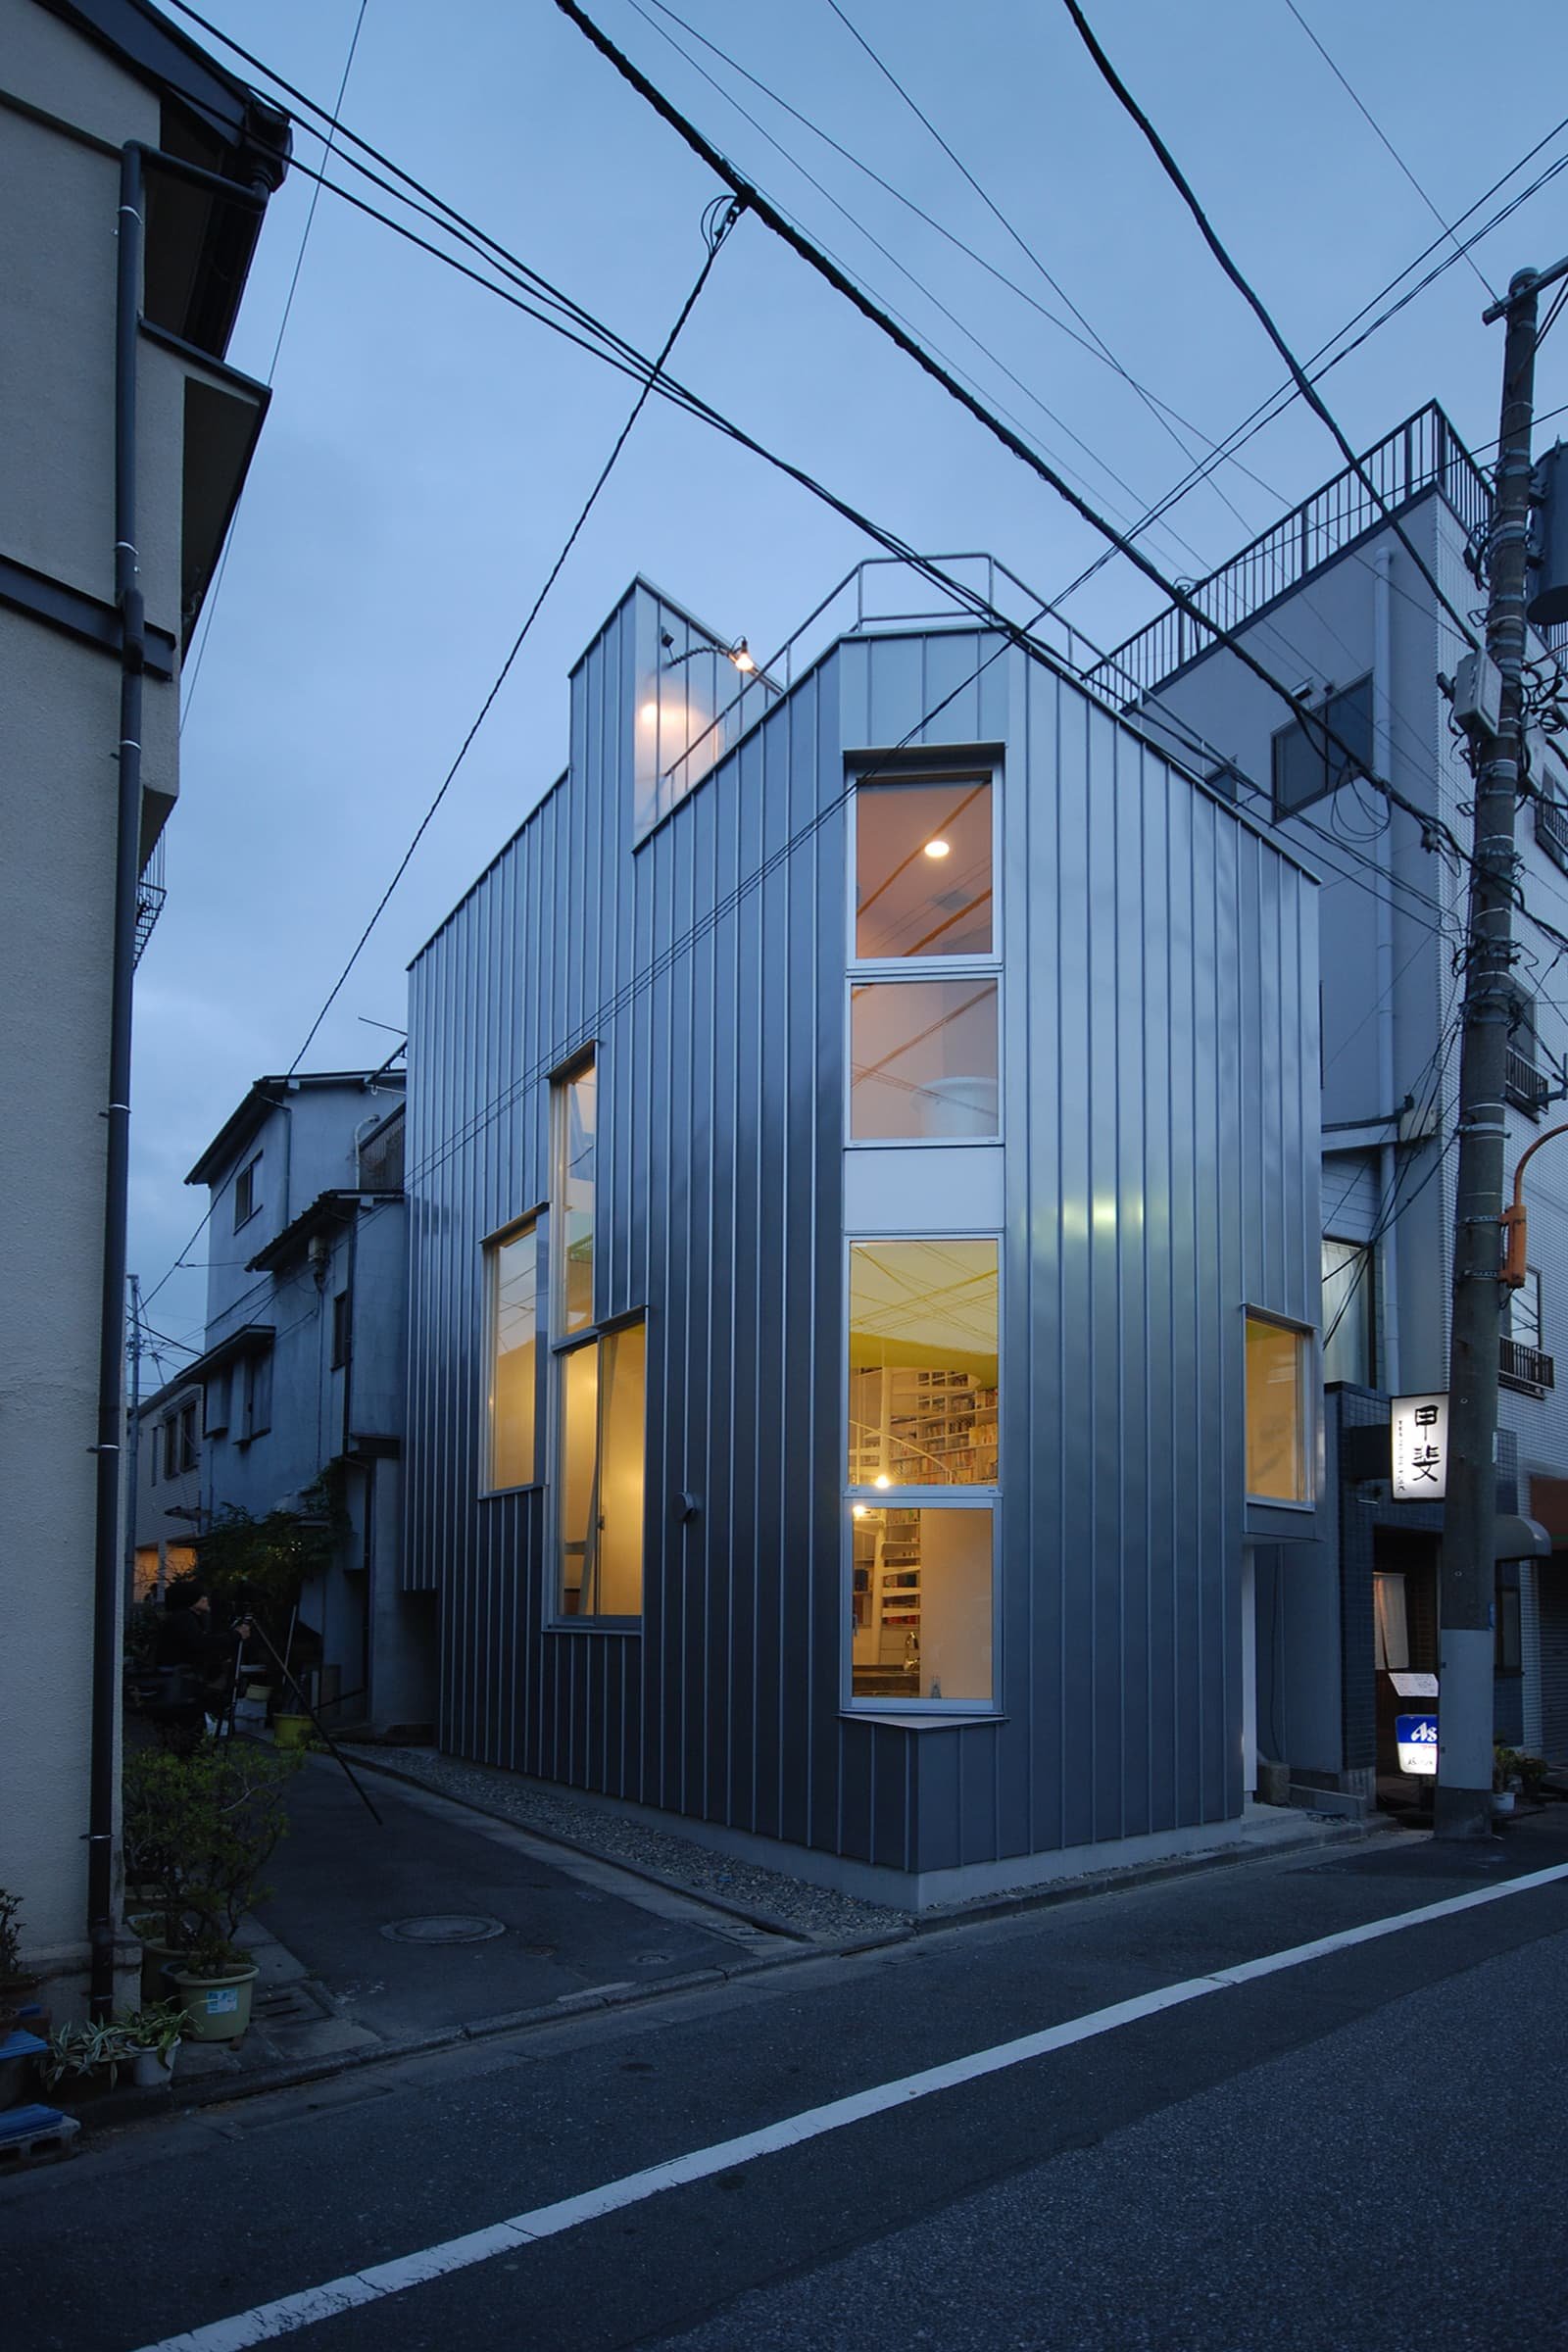 Bokutei Private Small House Tokyo Atelier Bow-Wow - 01.jpg